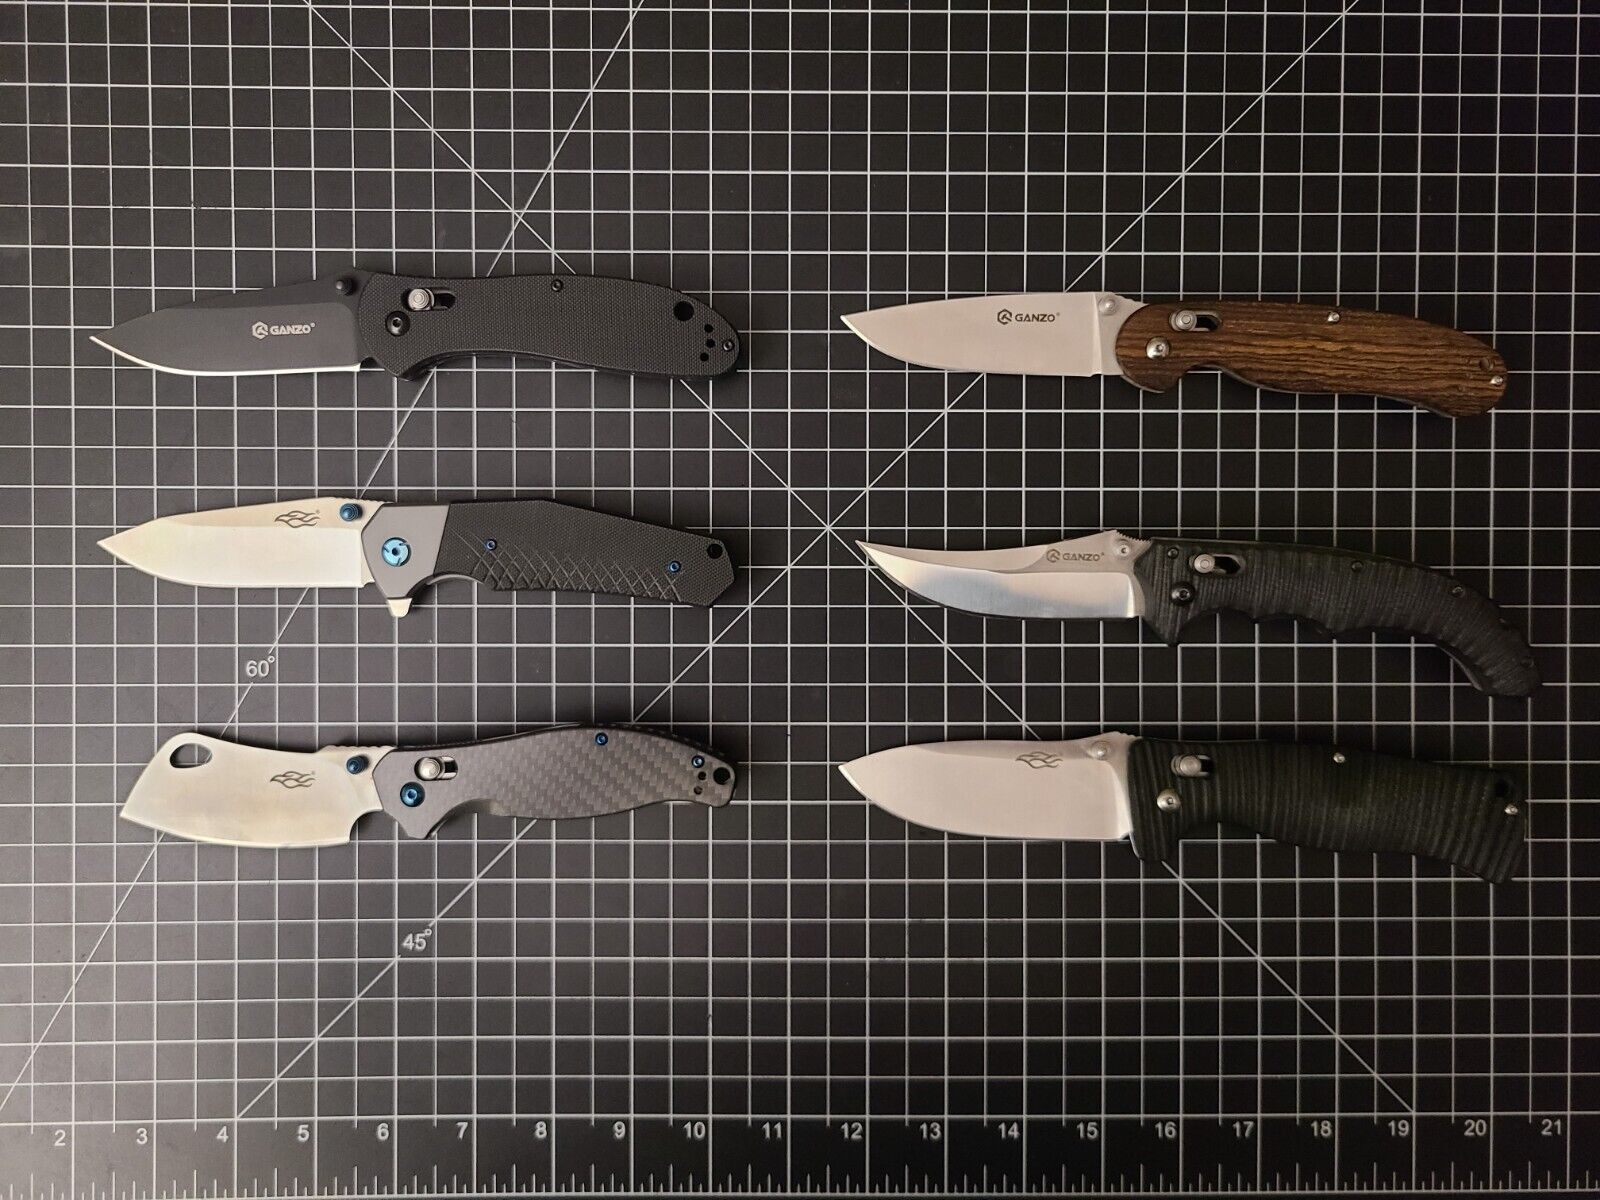 Ganzo-Very Rare-Discontinued-Hard To Find Models- 6 Knife Lot 